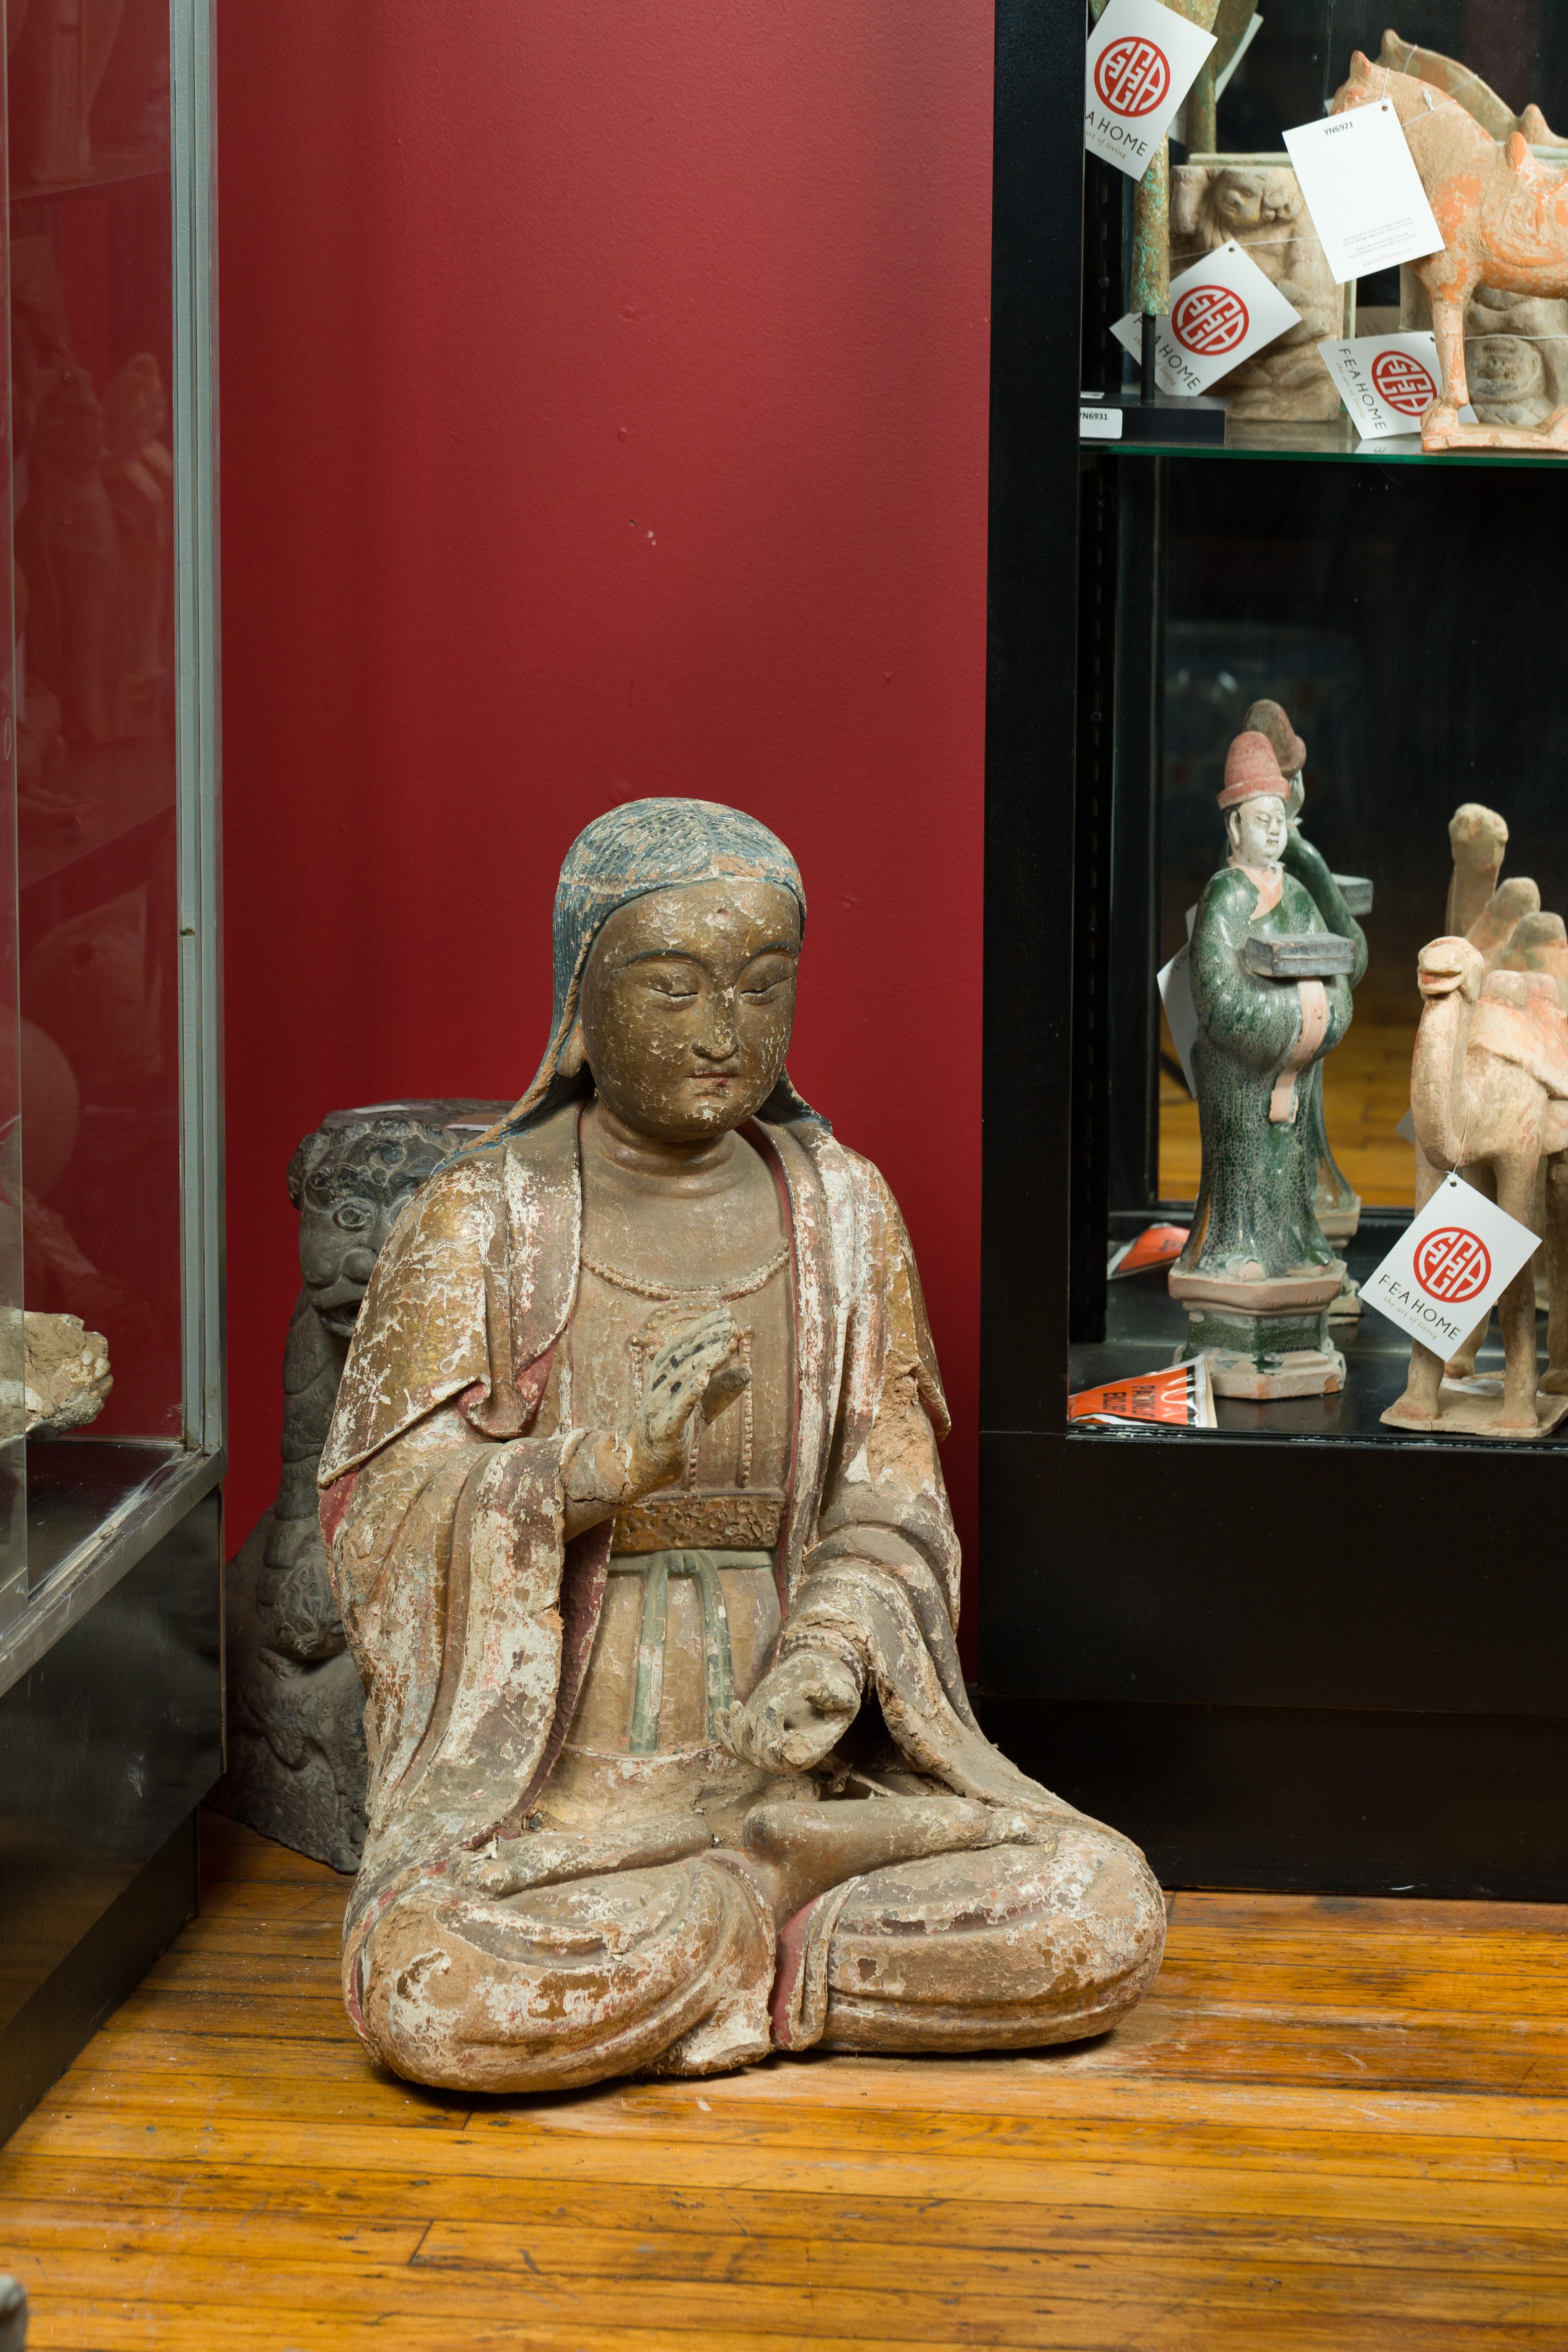 Chinese Song Dynasty Stucco Sculpture of Guanyin, Bodhisattva of Compassion 5